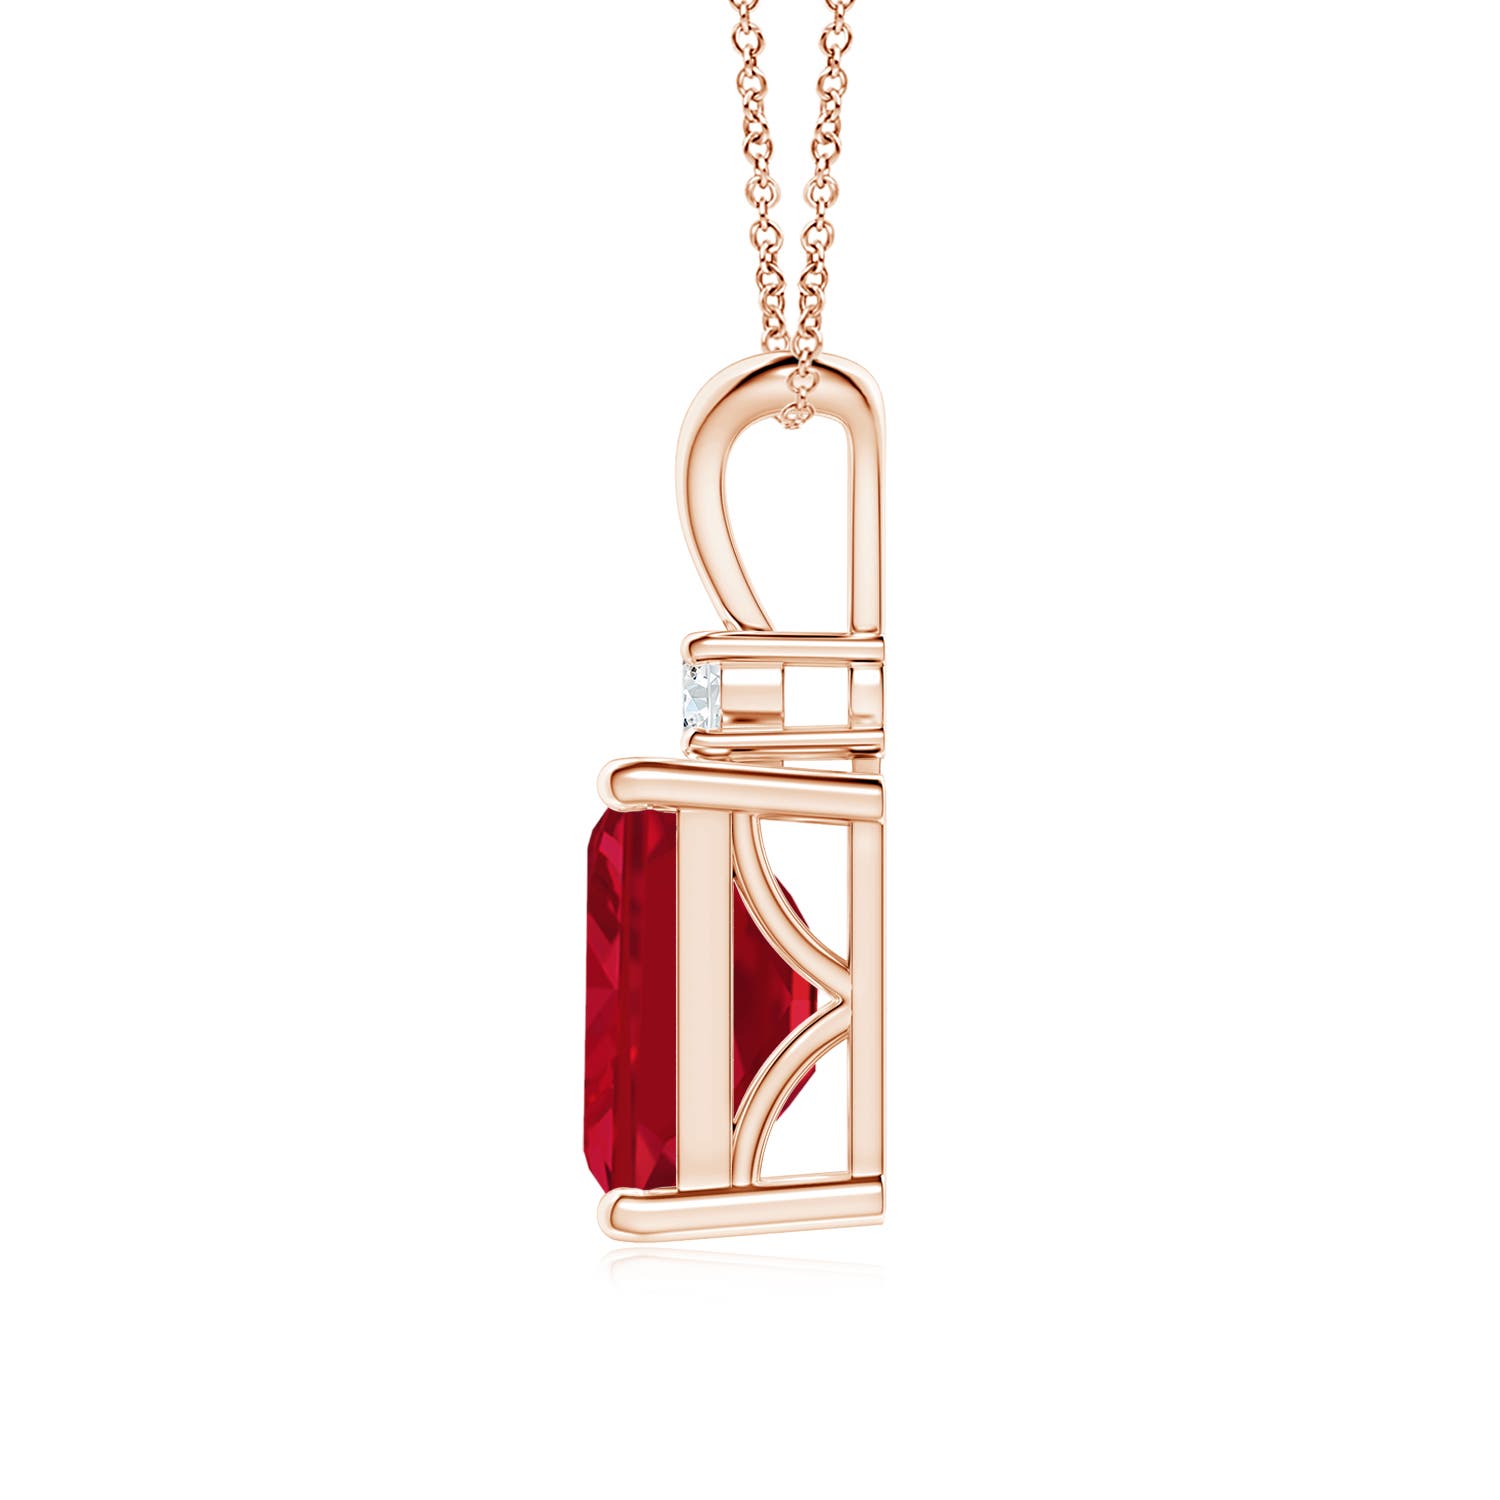 AAA - Ruby / 3.07 CT / 14 KT Rose Gold